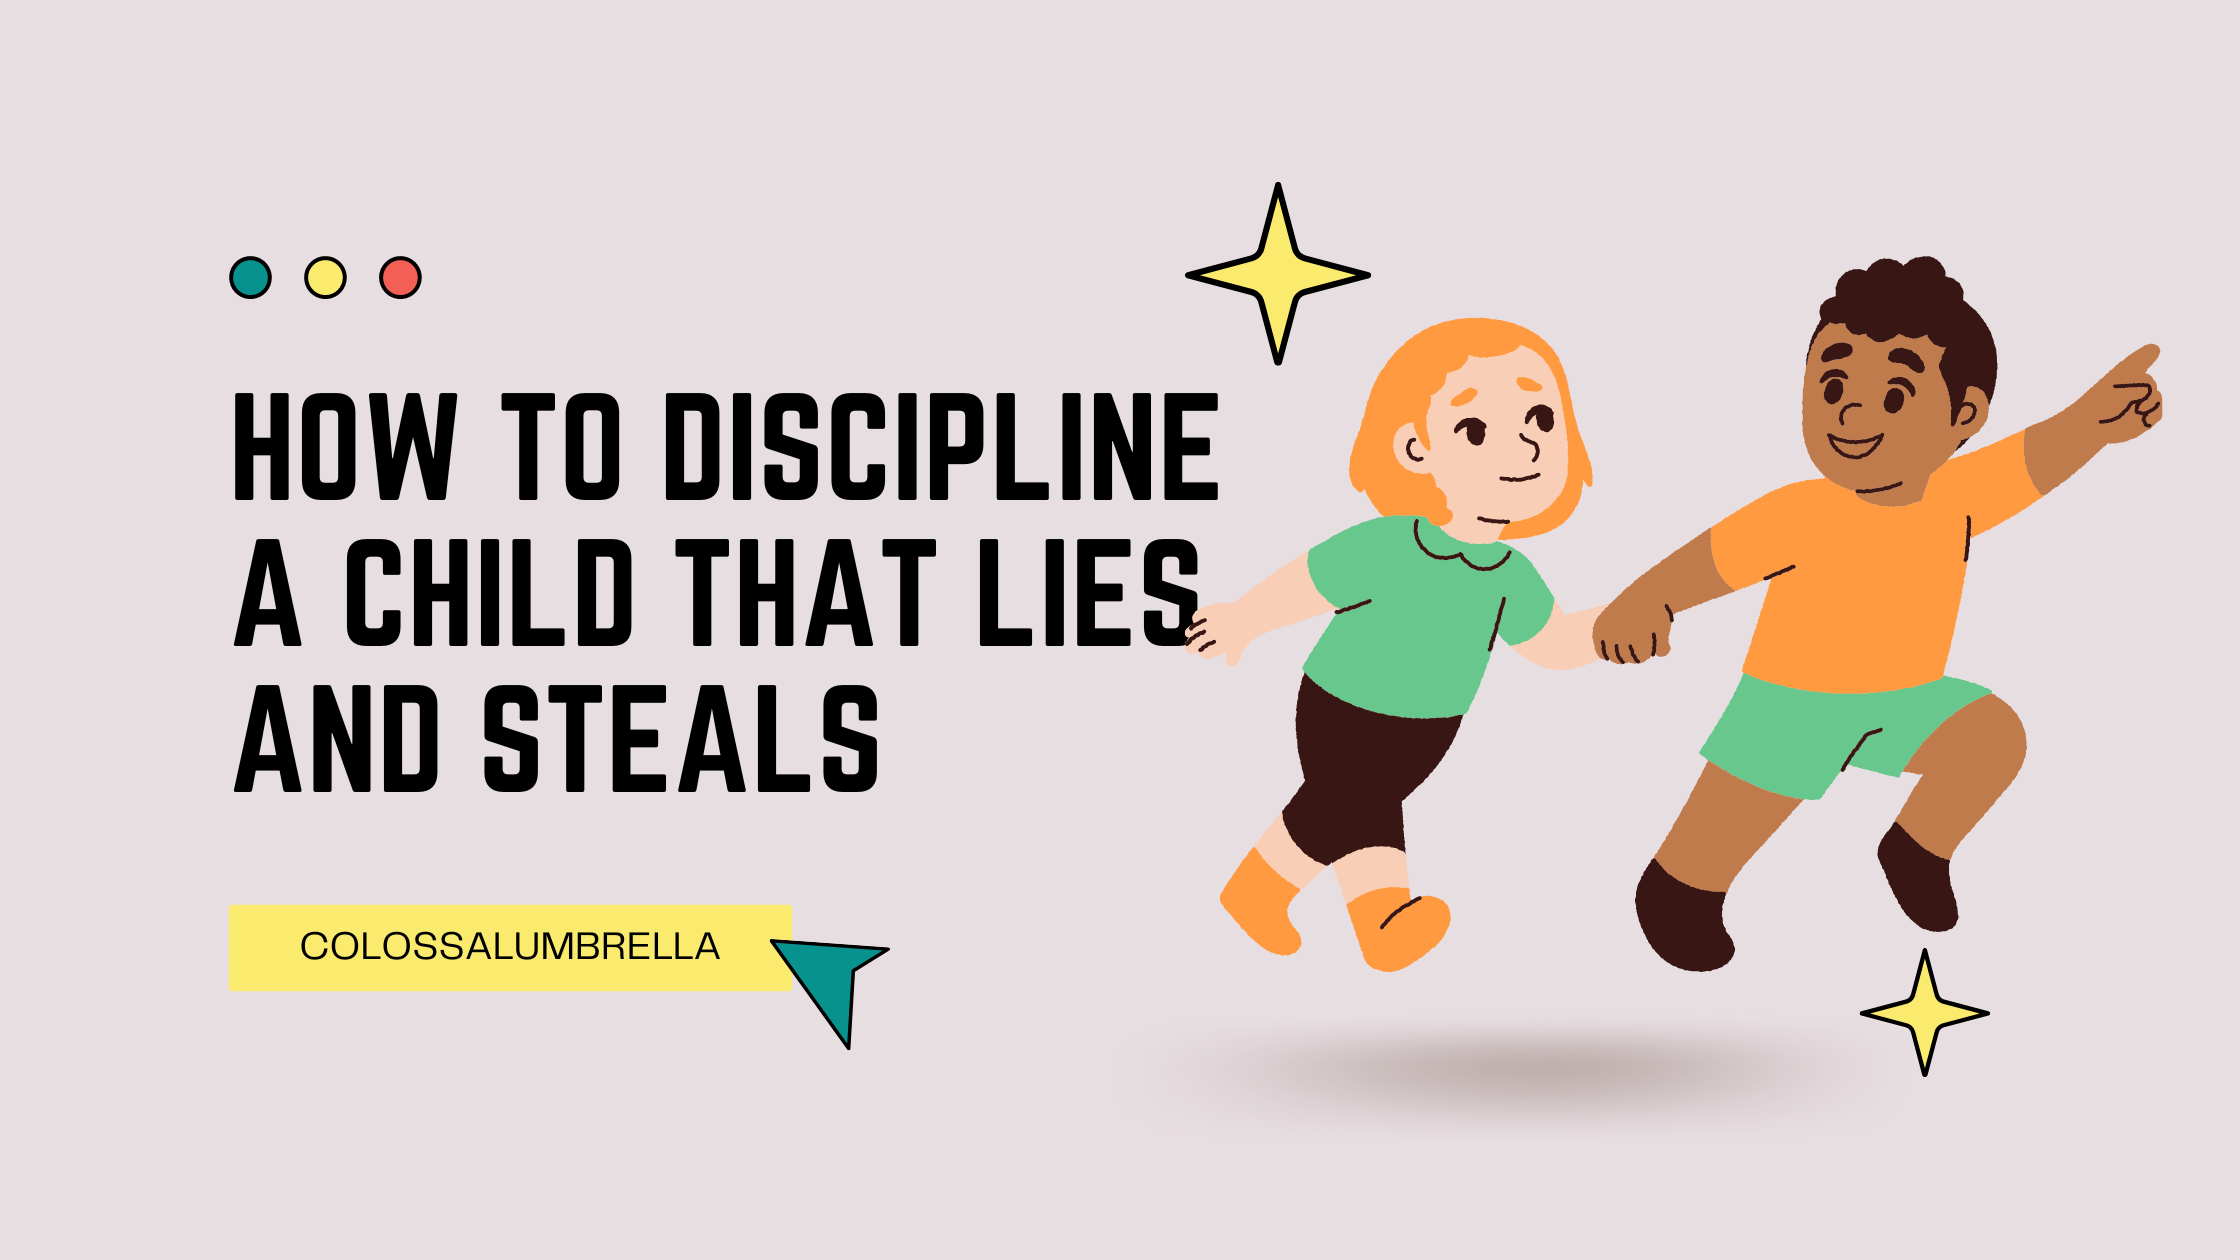 15 Tips on how to discipline a child that lies and steals